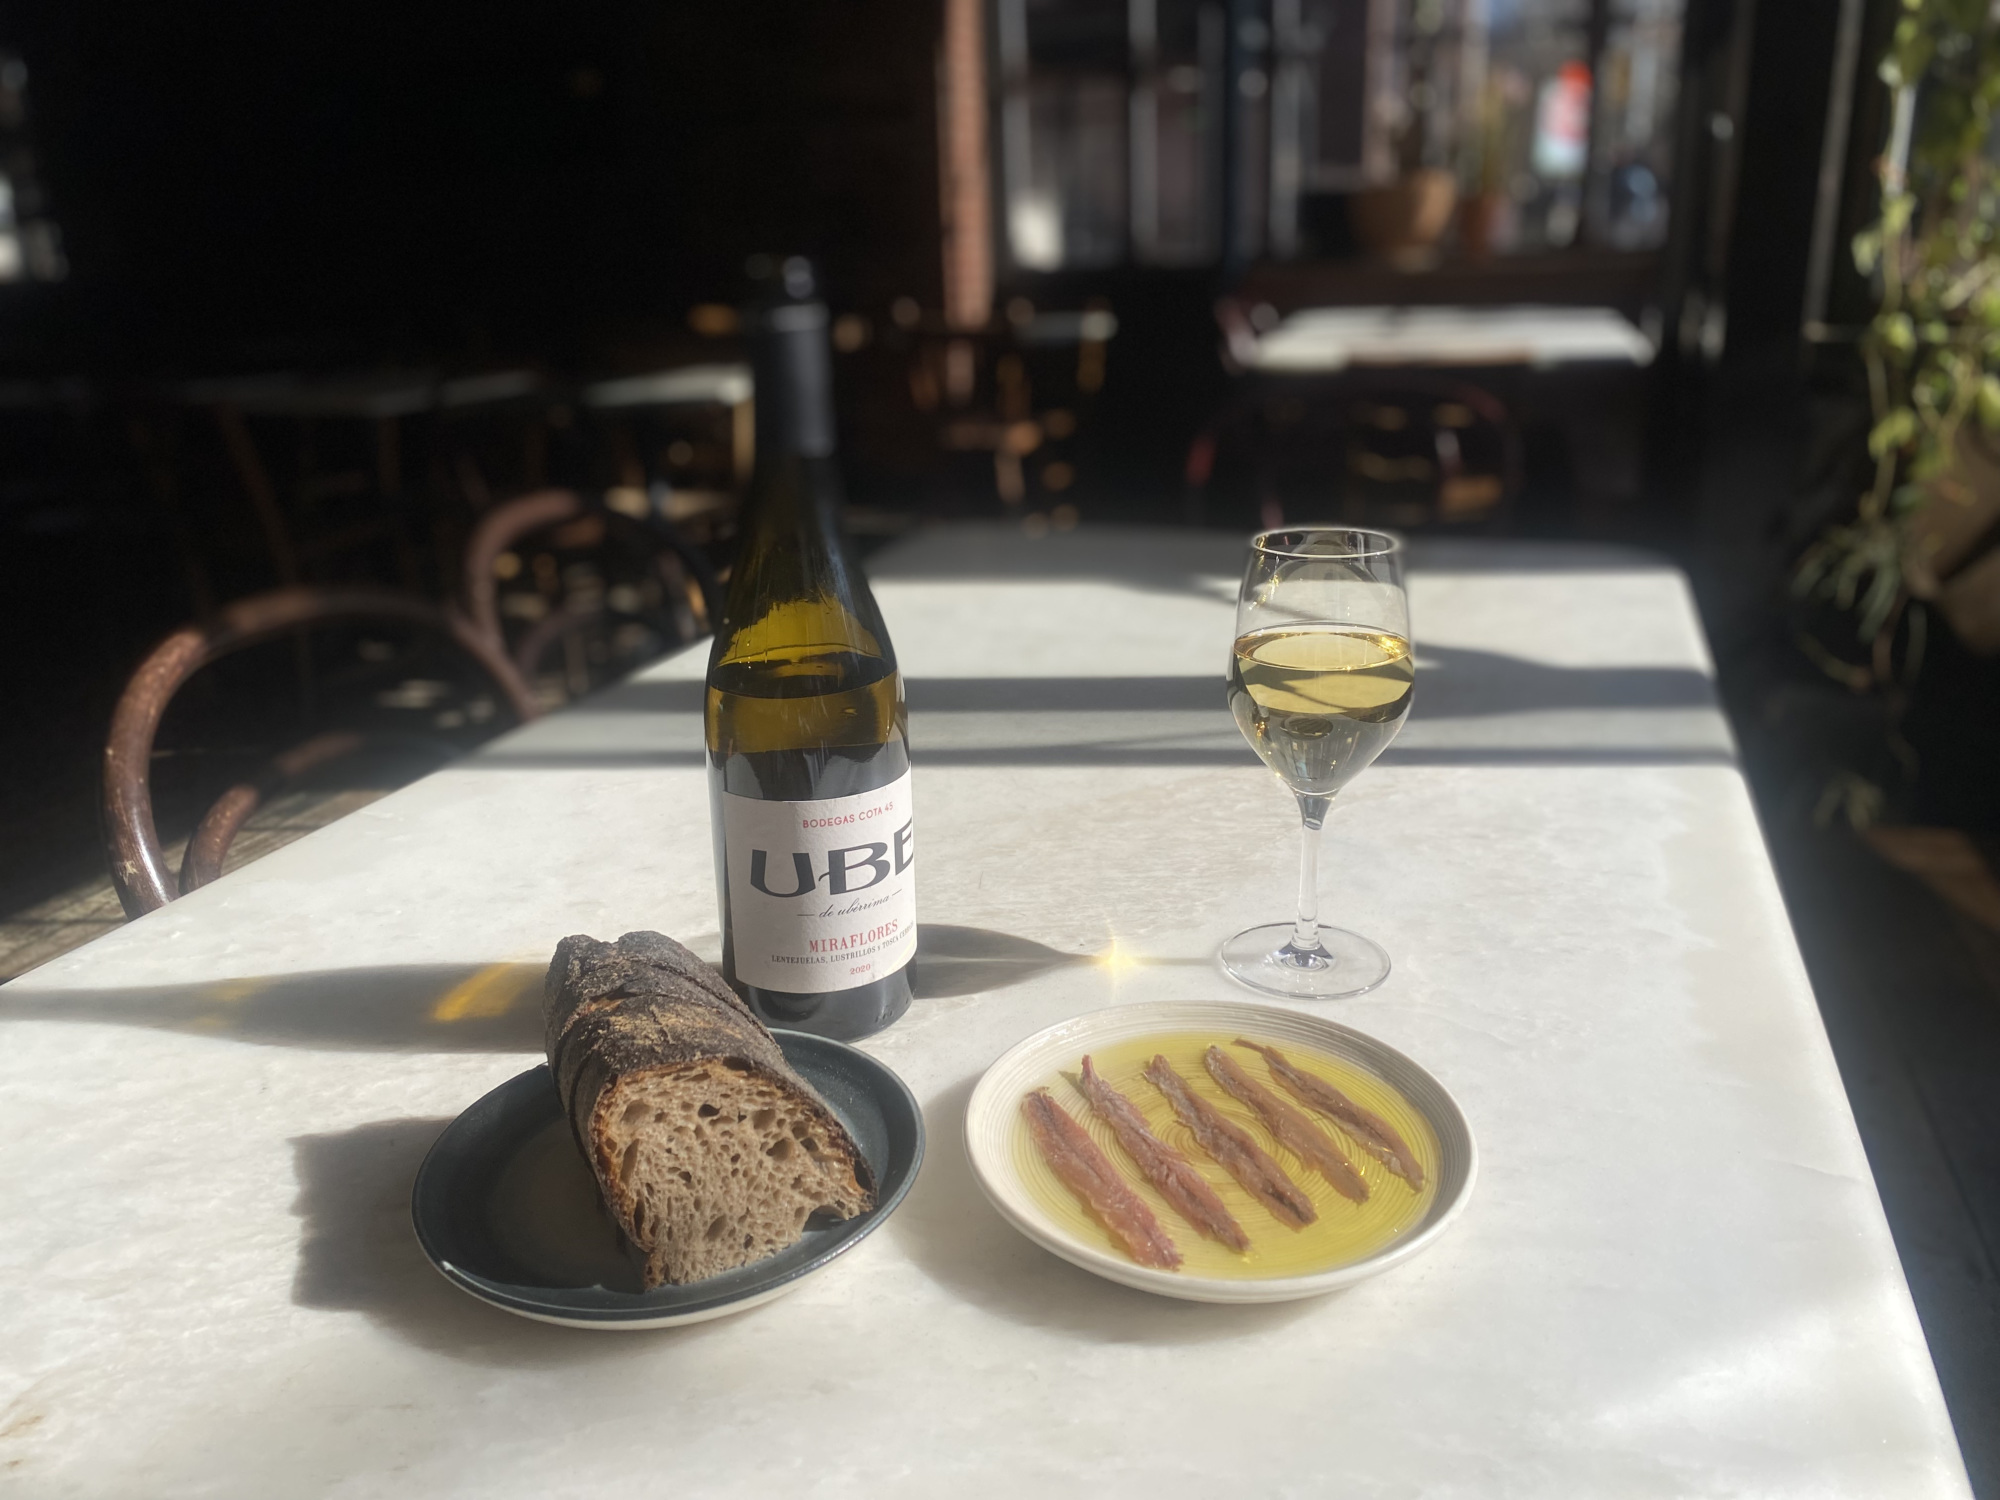 Rhodora Wine Bar's anchovies are best paired with Cota 45’s UBE Miraflores.